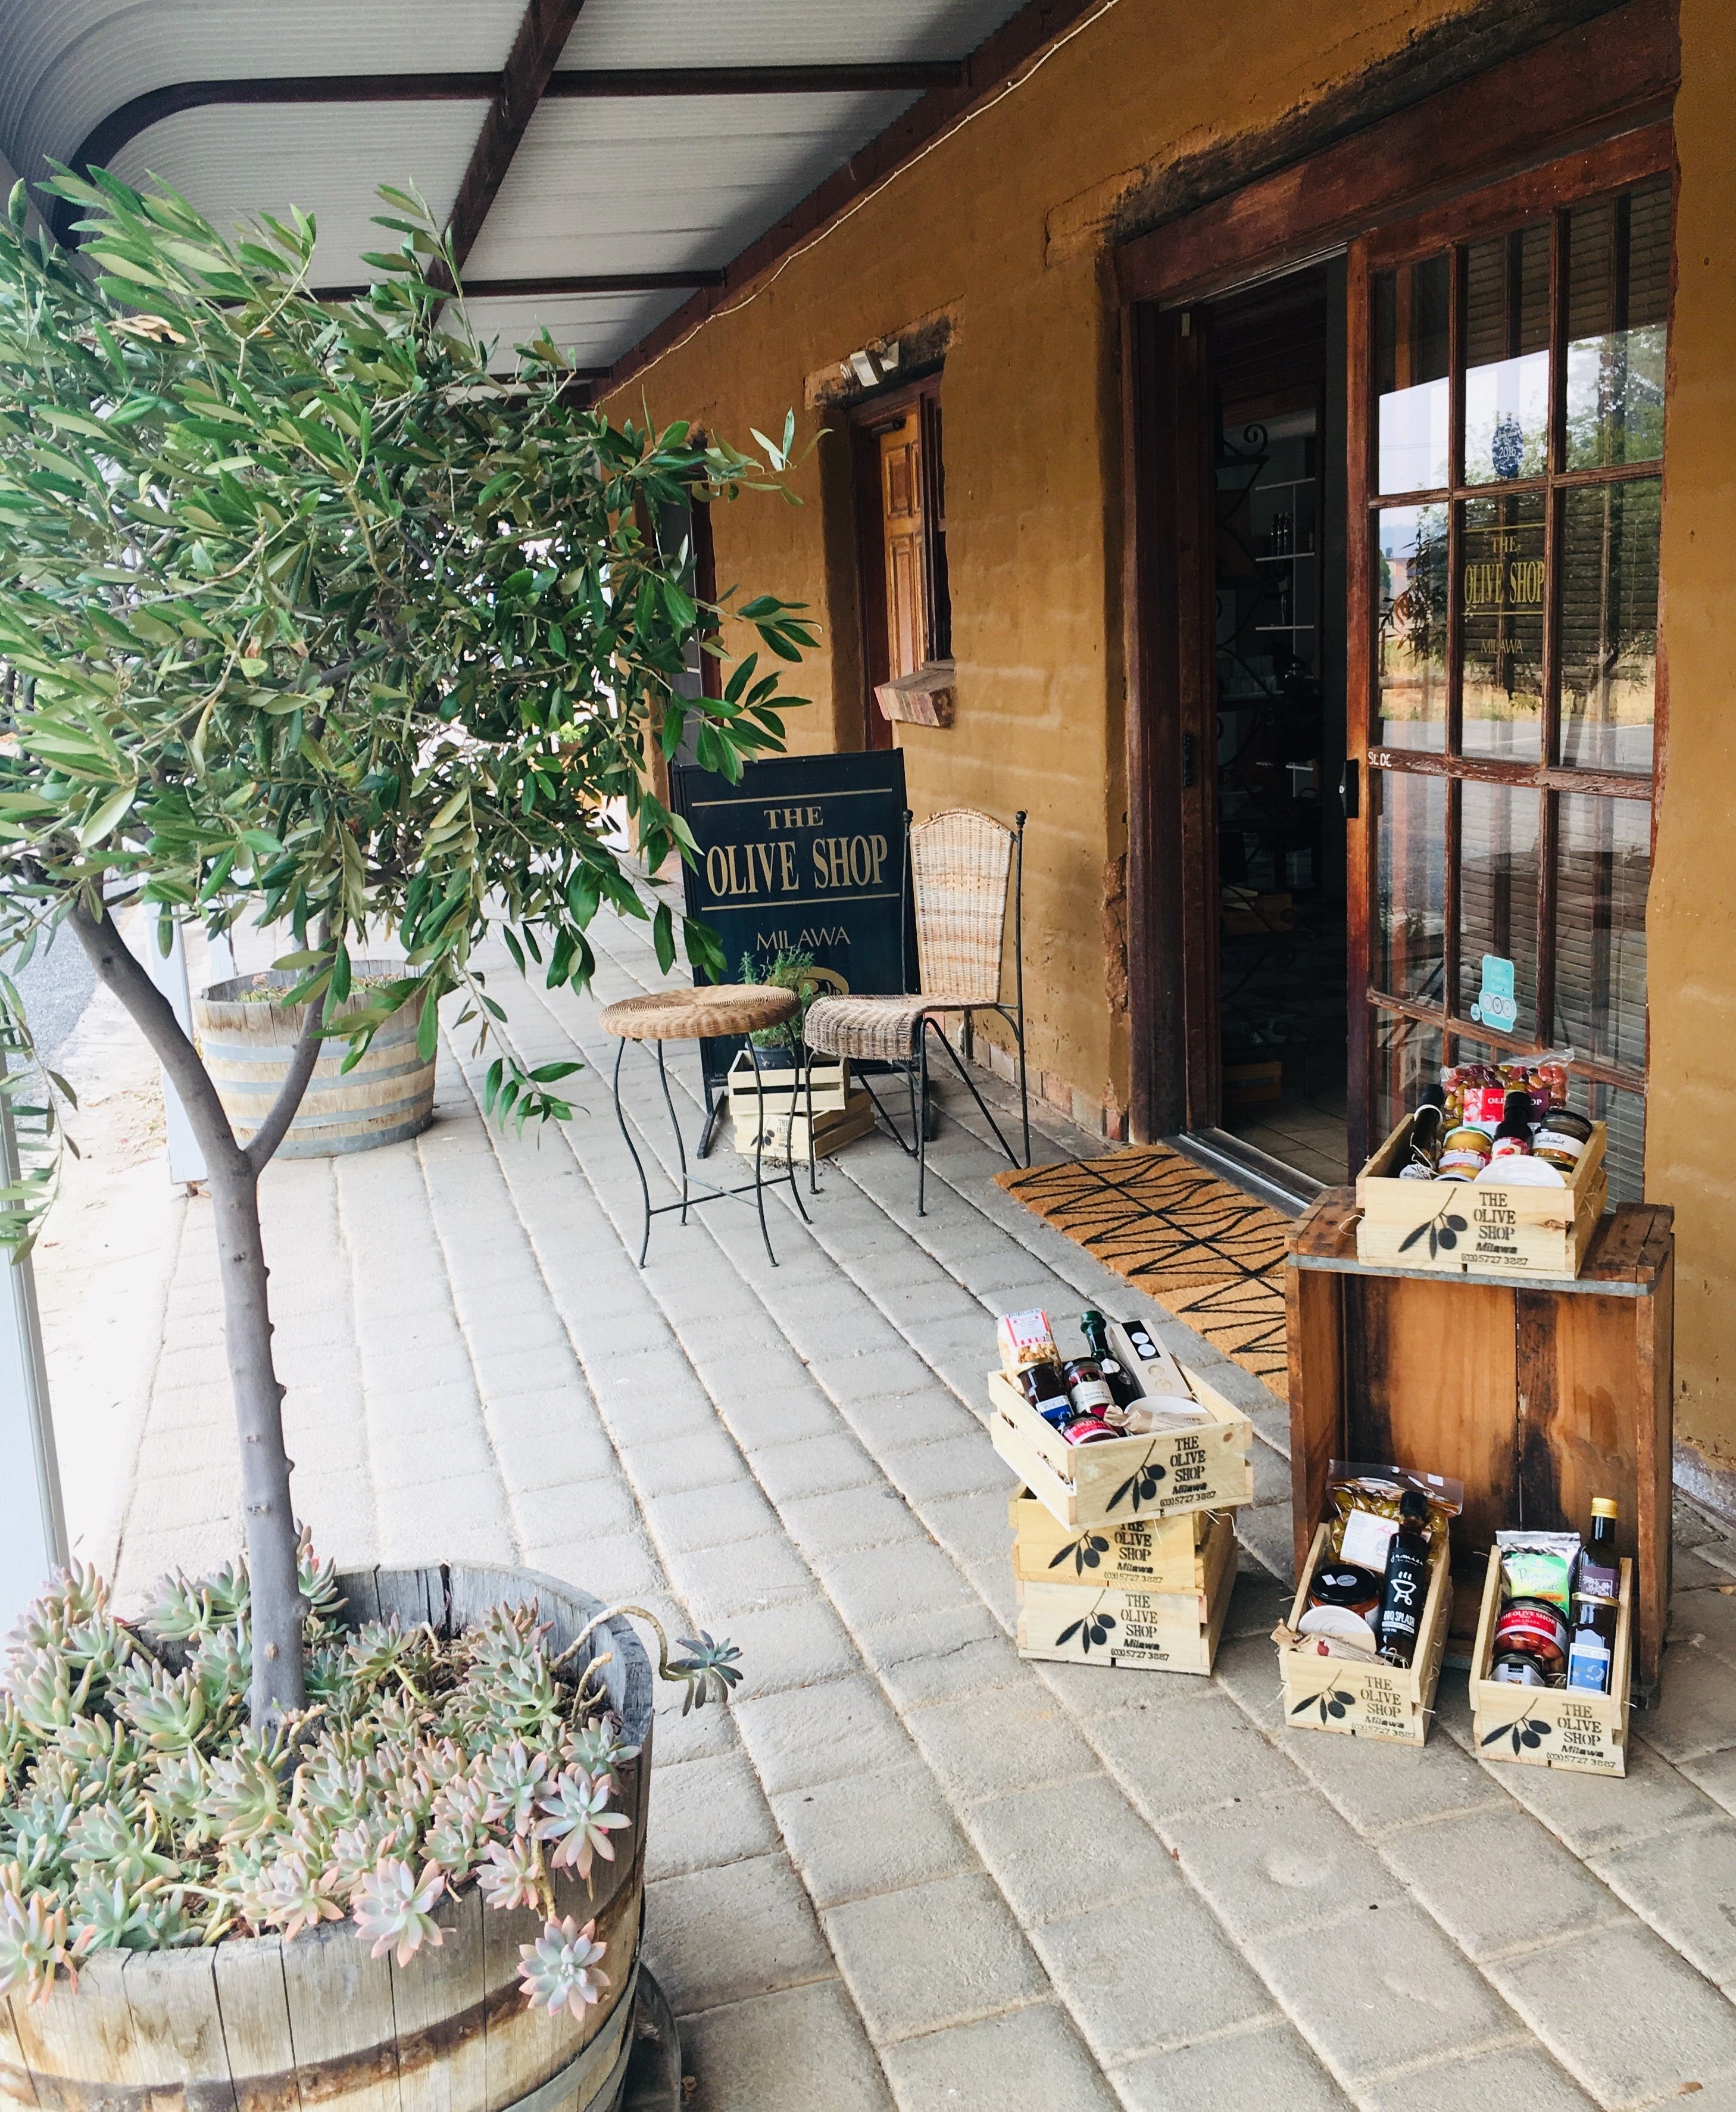 The Olive Shop - Milawa - Find Attractions